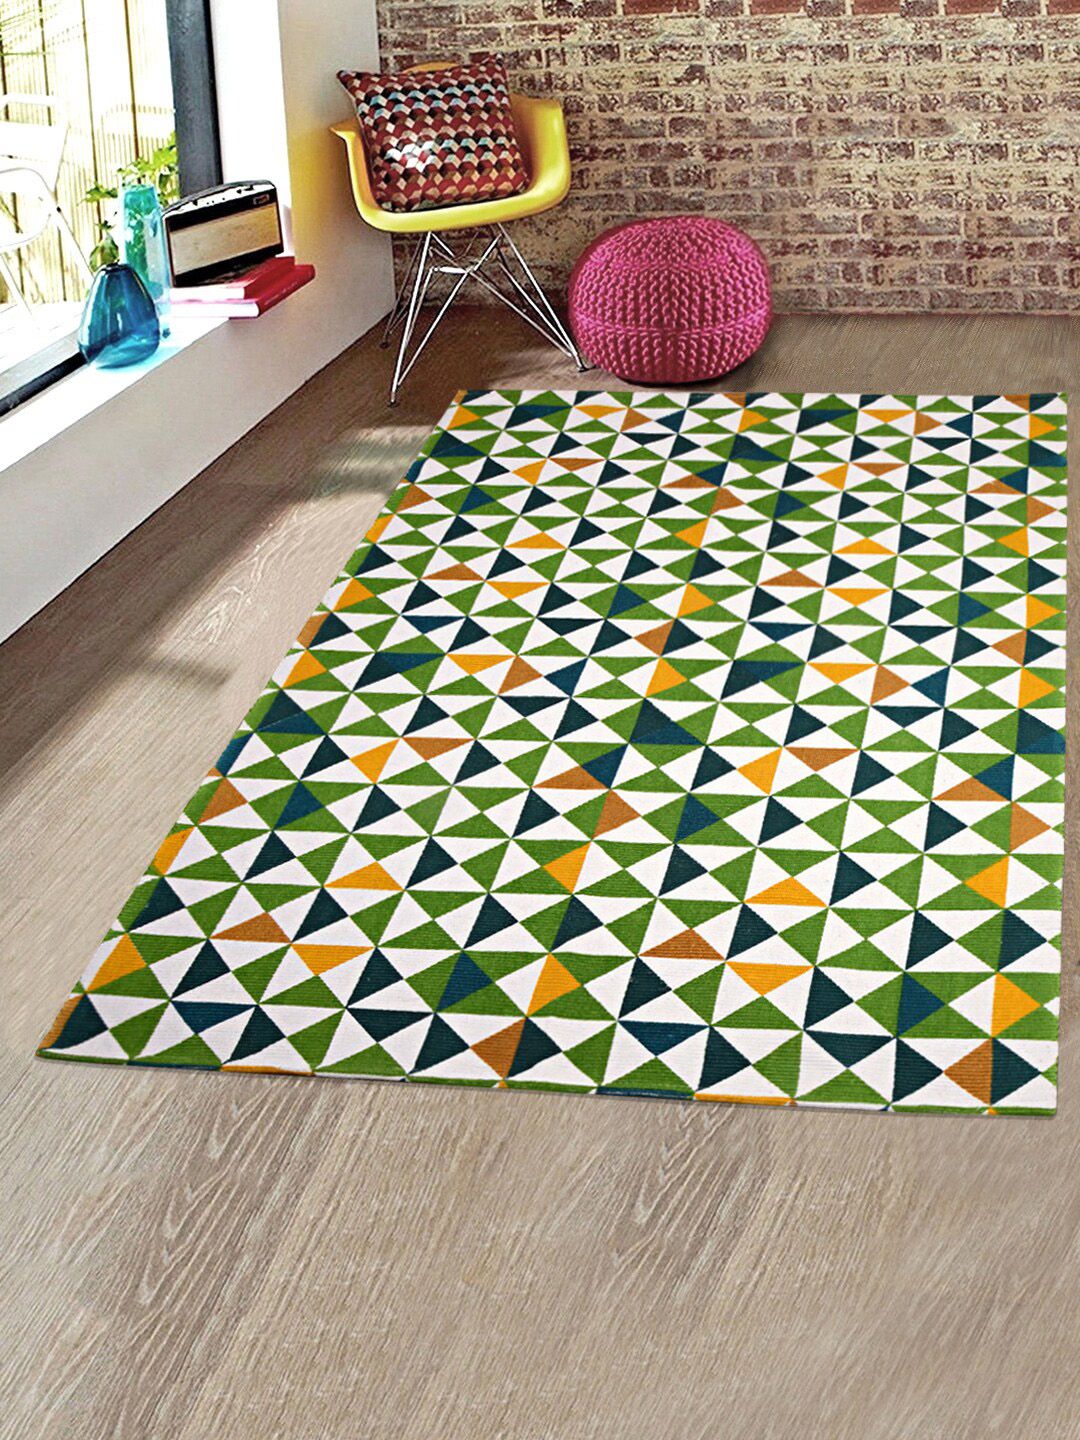 Saral Home White & Green Geometric Printed Cotton Traditional Carpet Price in India